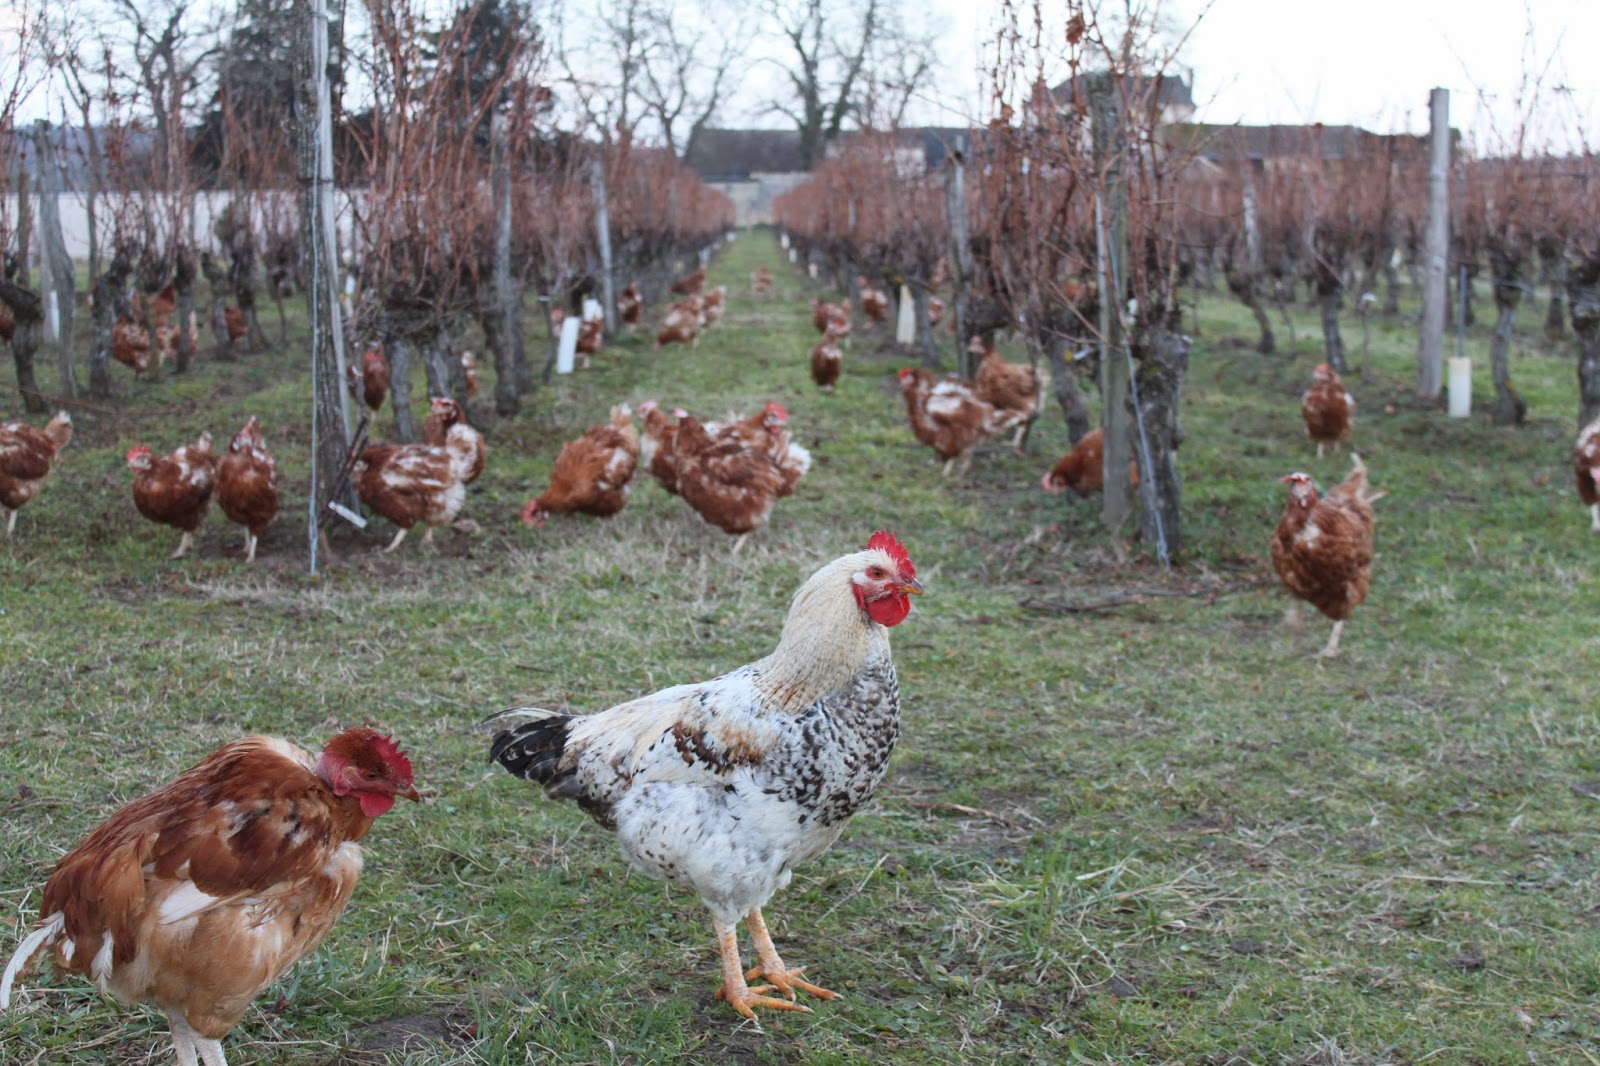 HENS WORKING FOR THE VINEYARDS